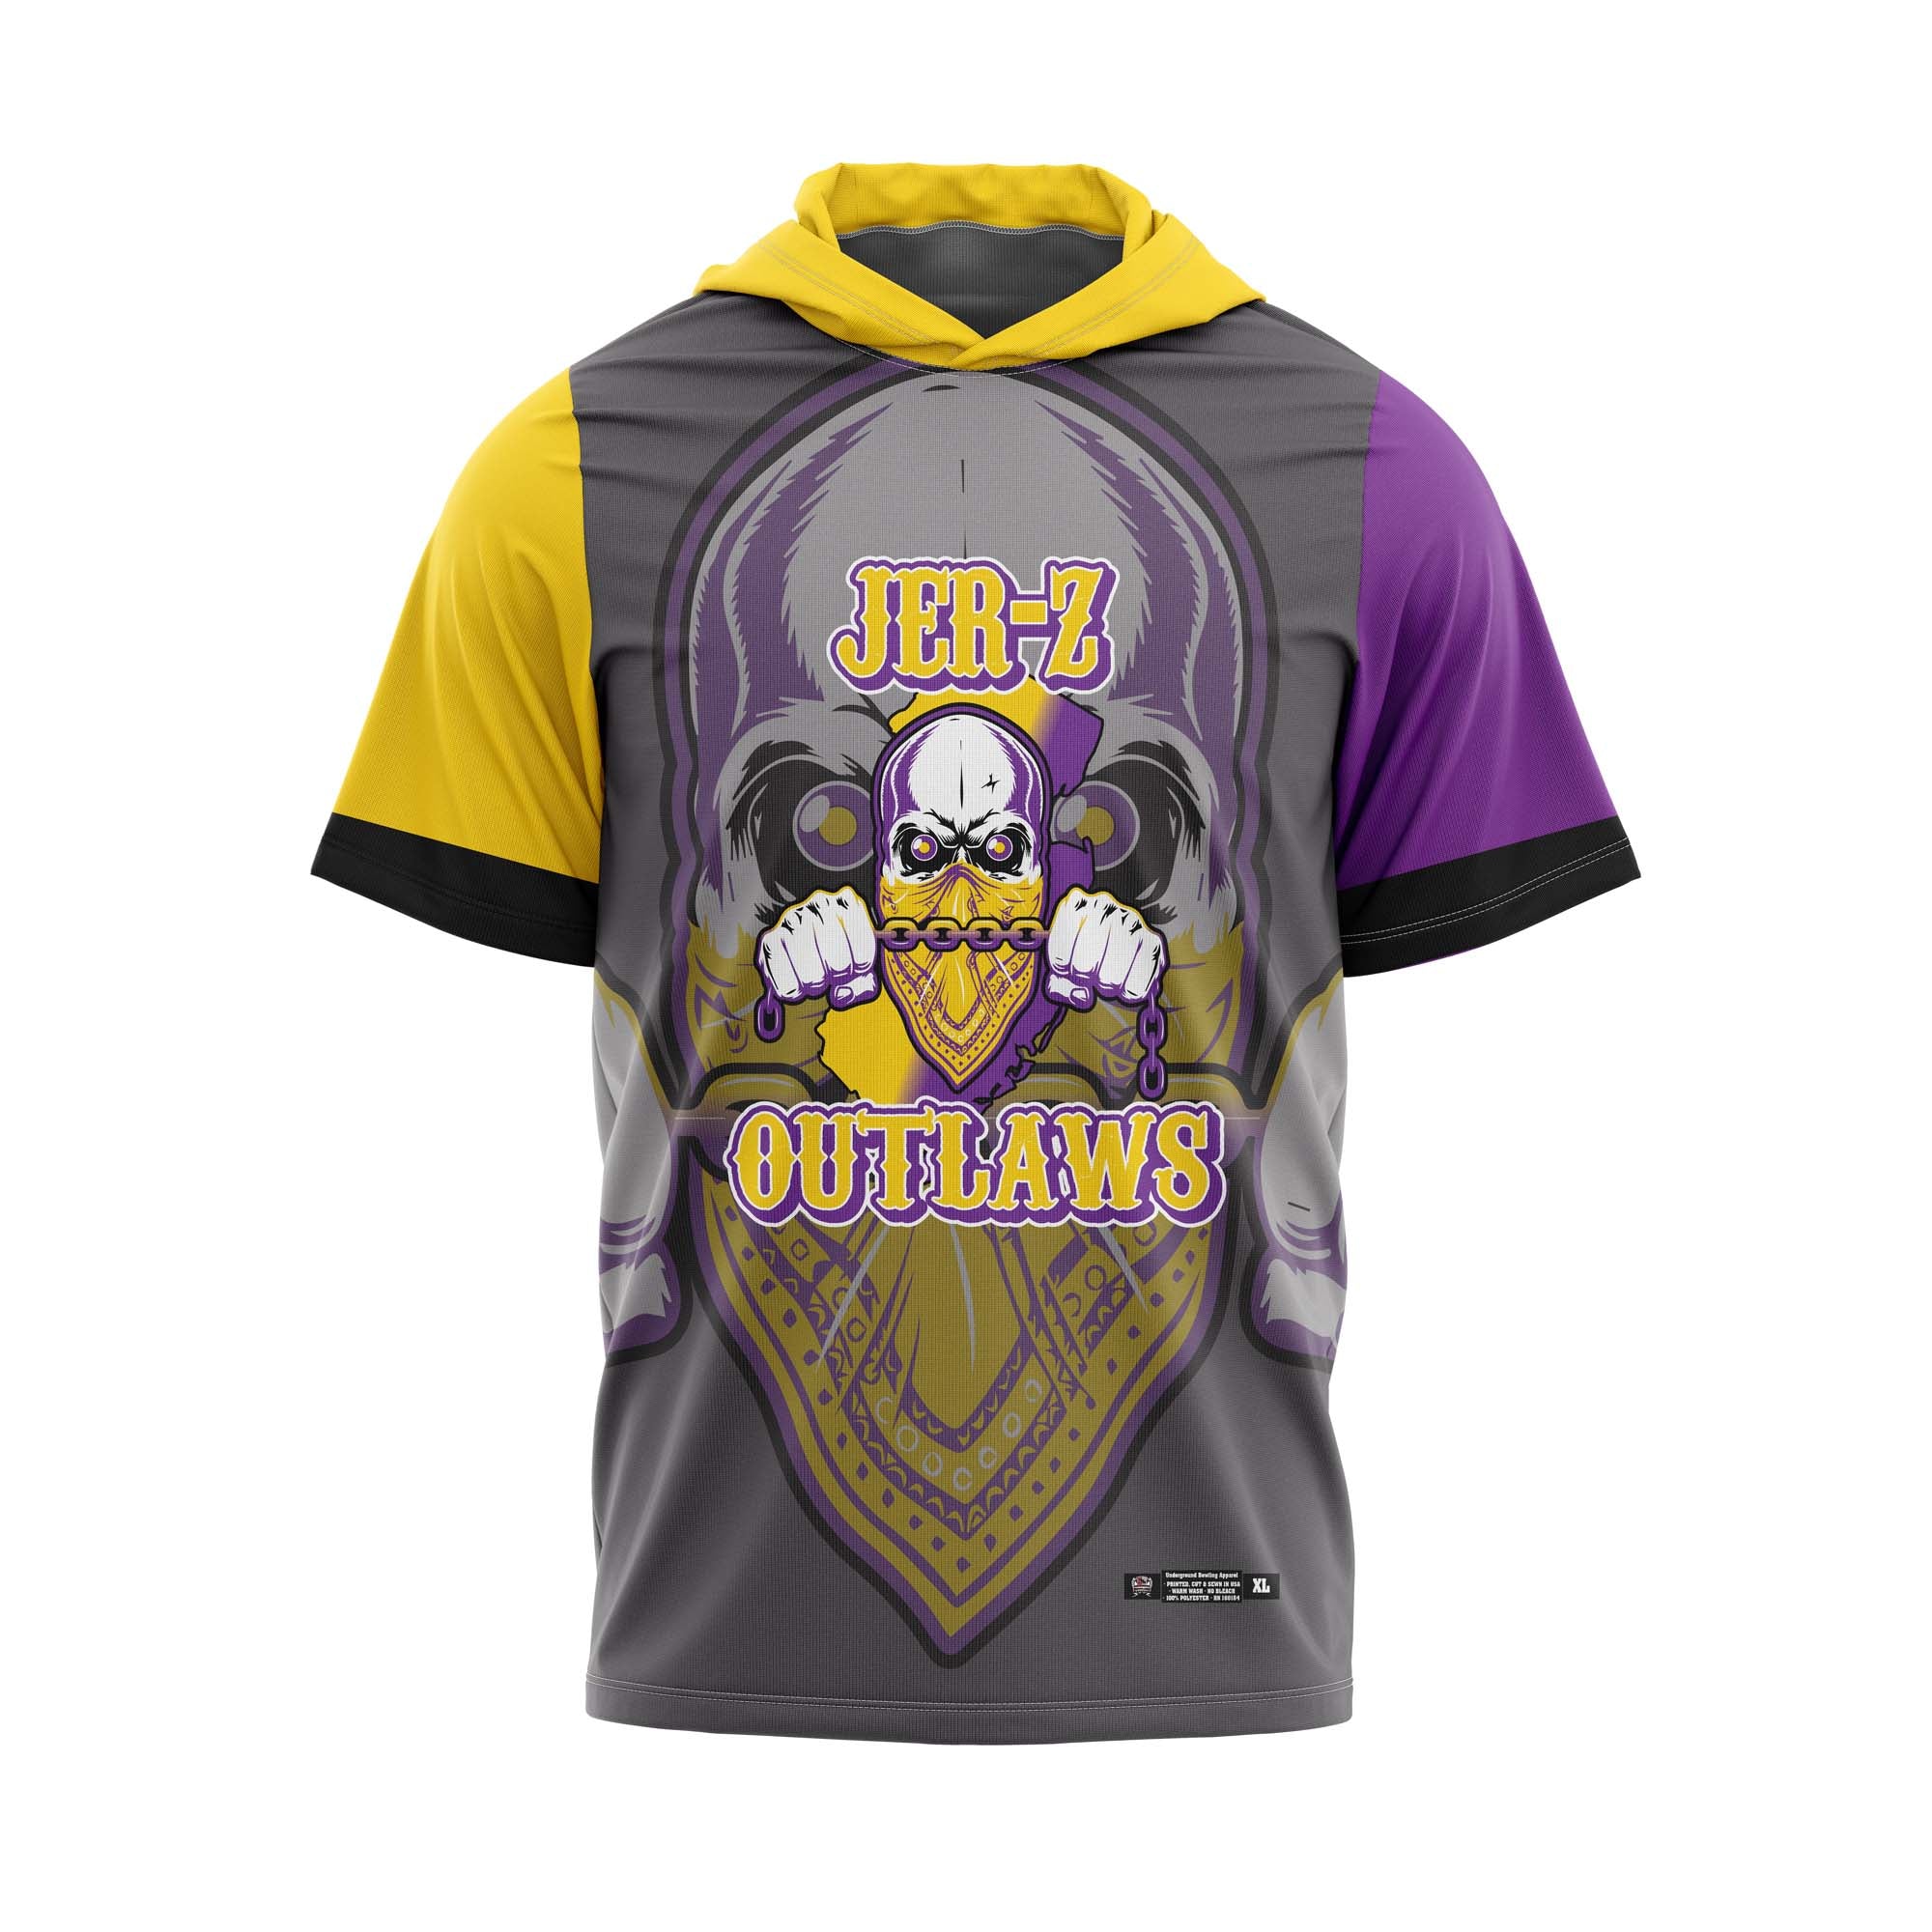 Jer -Z Outlaws Suns Out Gunz Out Jersey